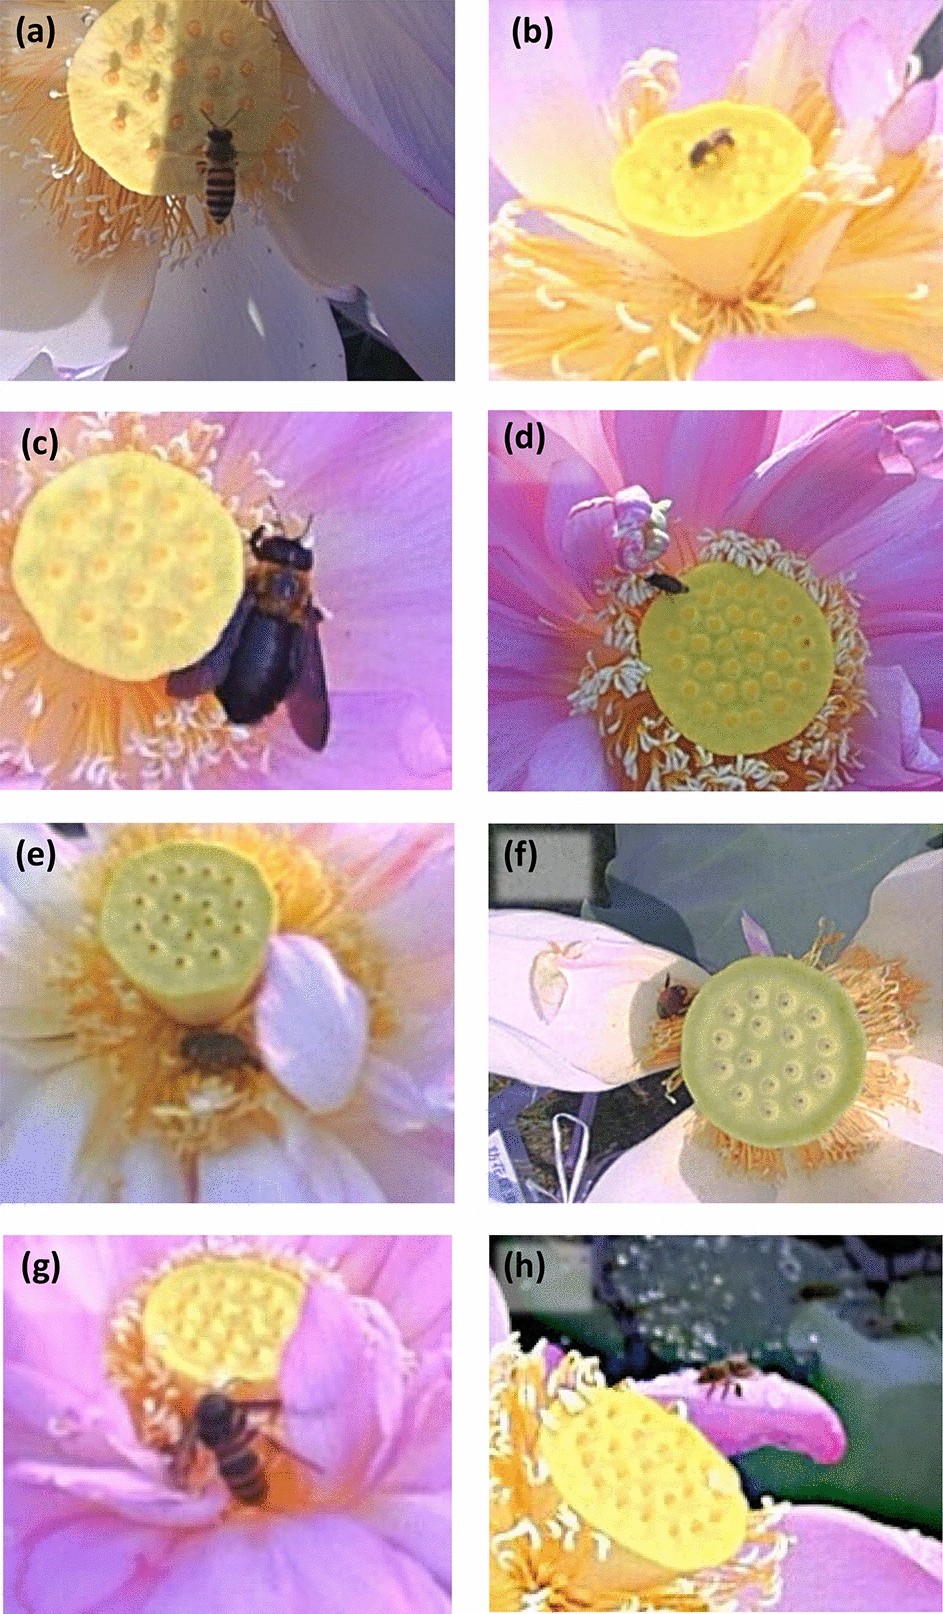 Periodically taken photographs reveal the effect of pollinator insects on seed set in lotus flowers Scientific Reports image picture photo